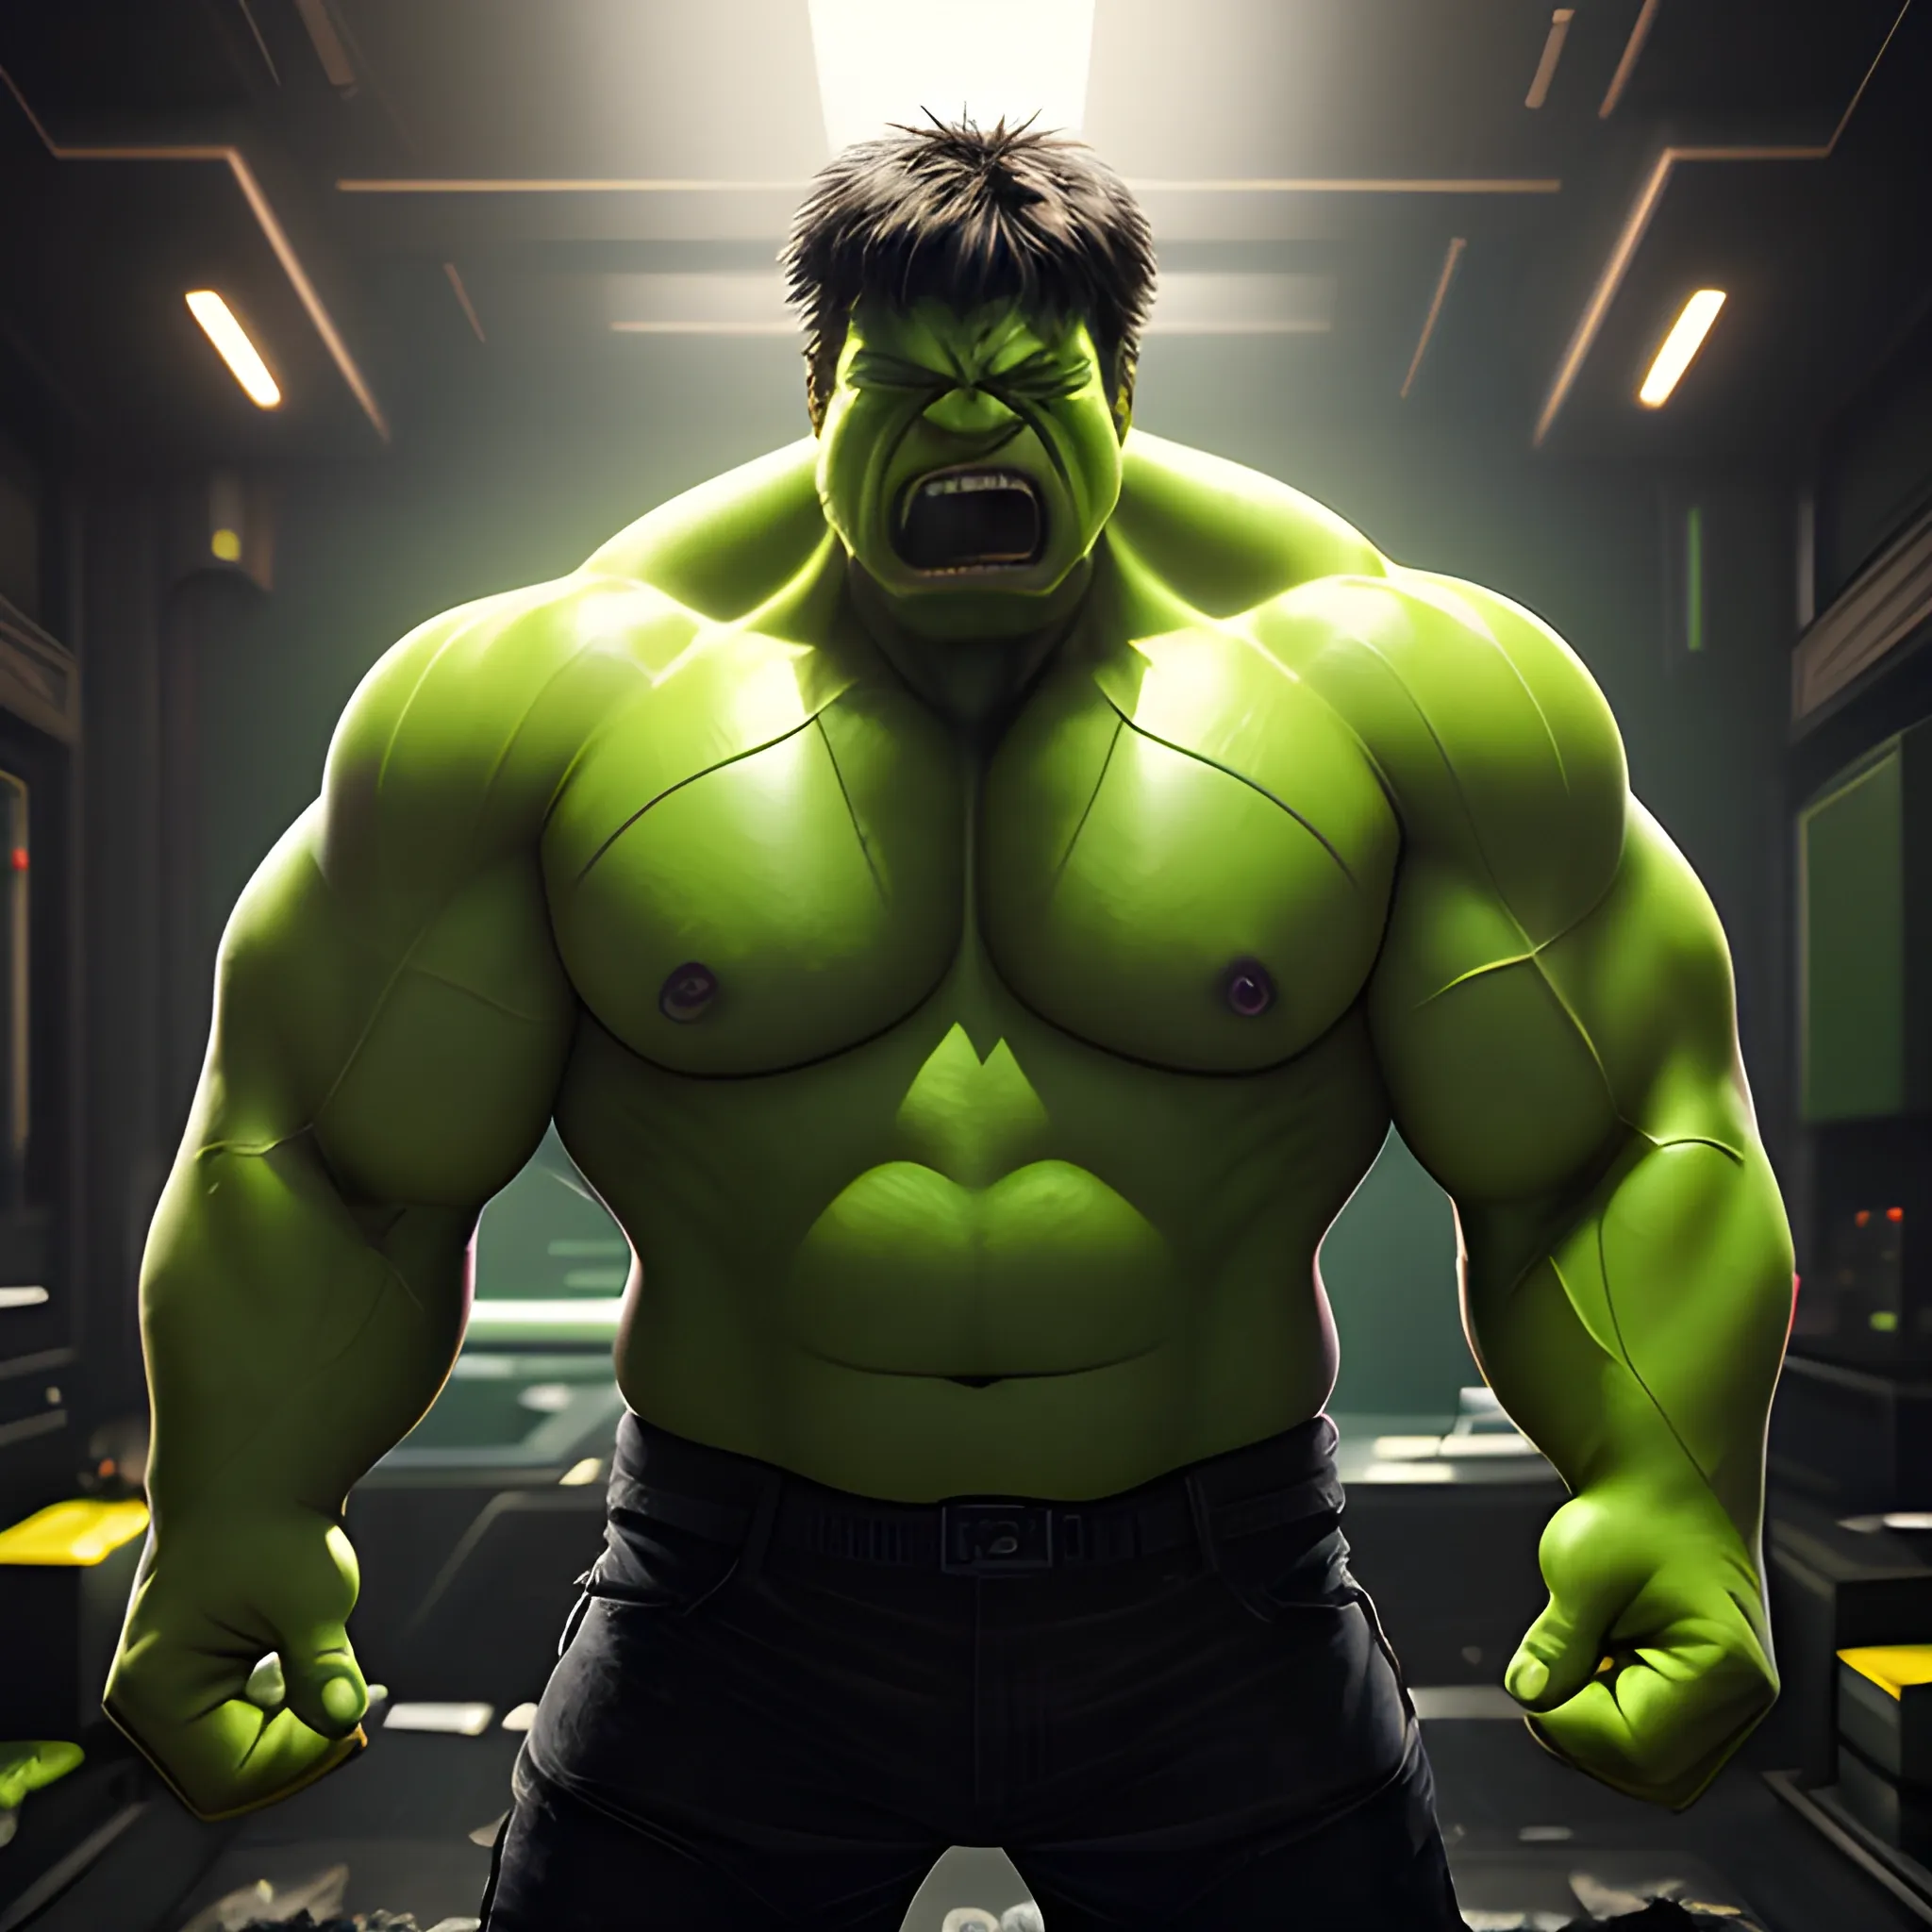 Create a hyper-realistic 4k image of the iconic green Hulk. He should be in the act of taking a bite from a single slice of pizza, with cheese visibly dripping from the slice. While Hulk should have subtle cybernetic enhancements, his primary appearance should be unmistakably that of the classic Hulk. Illuminate the scene with soft studio lighting and edge highlights, and set against a luxurious cyberpunk background.